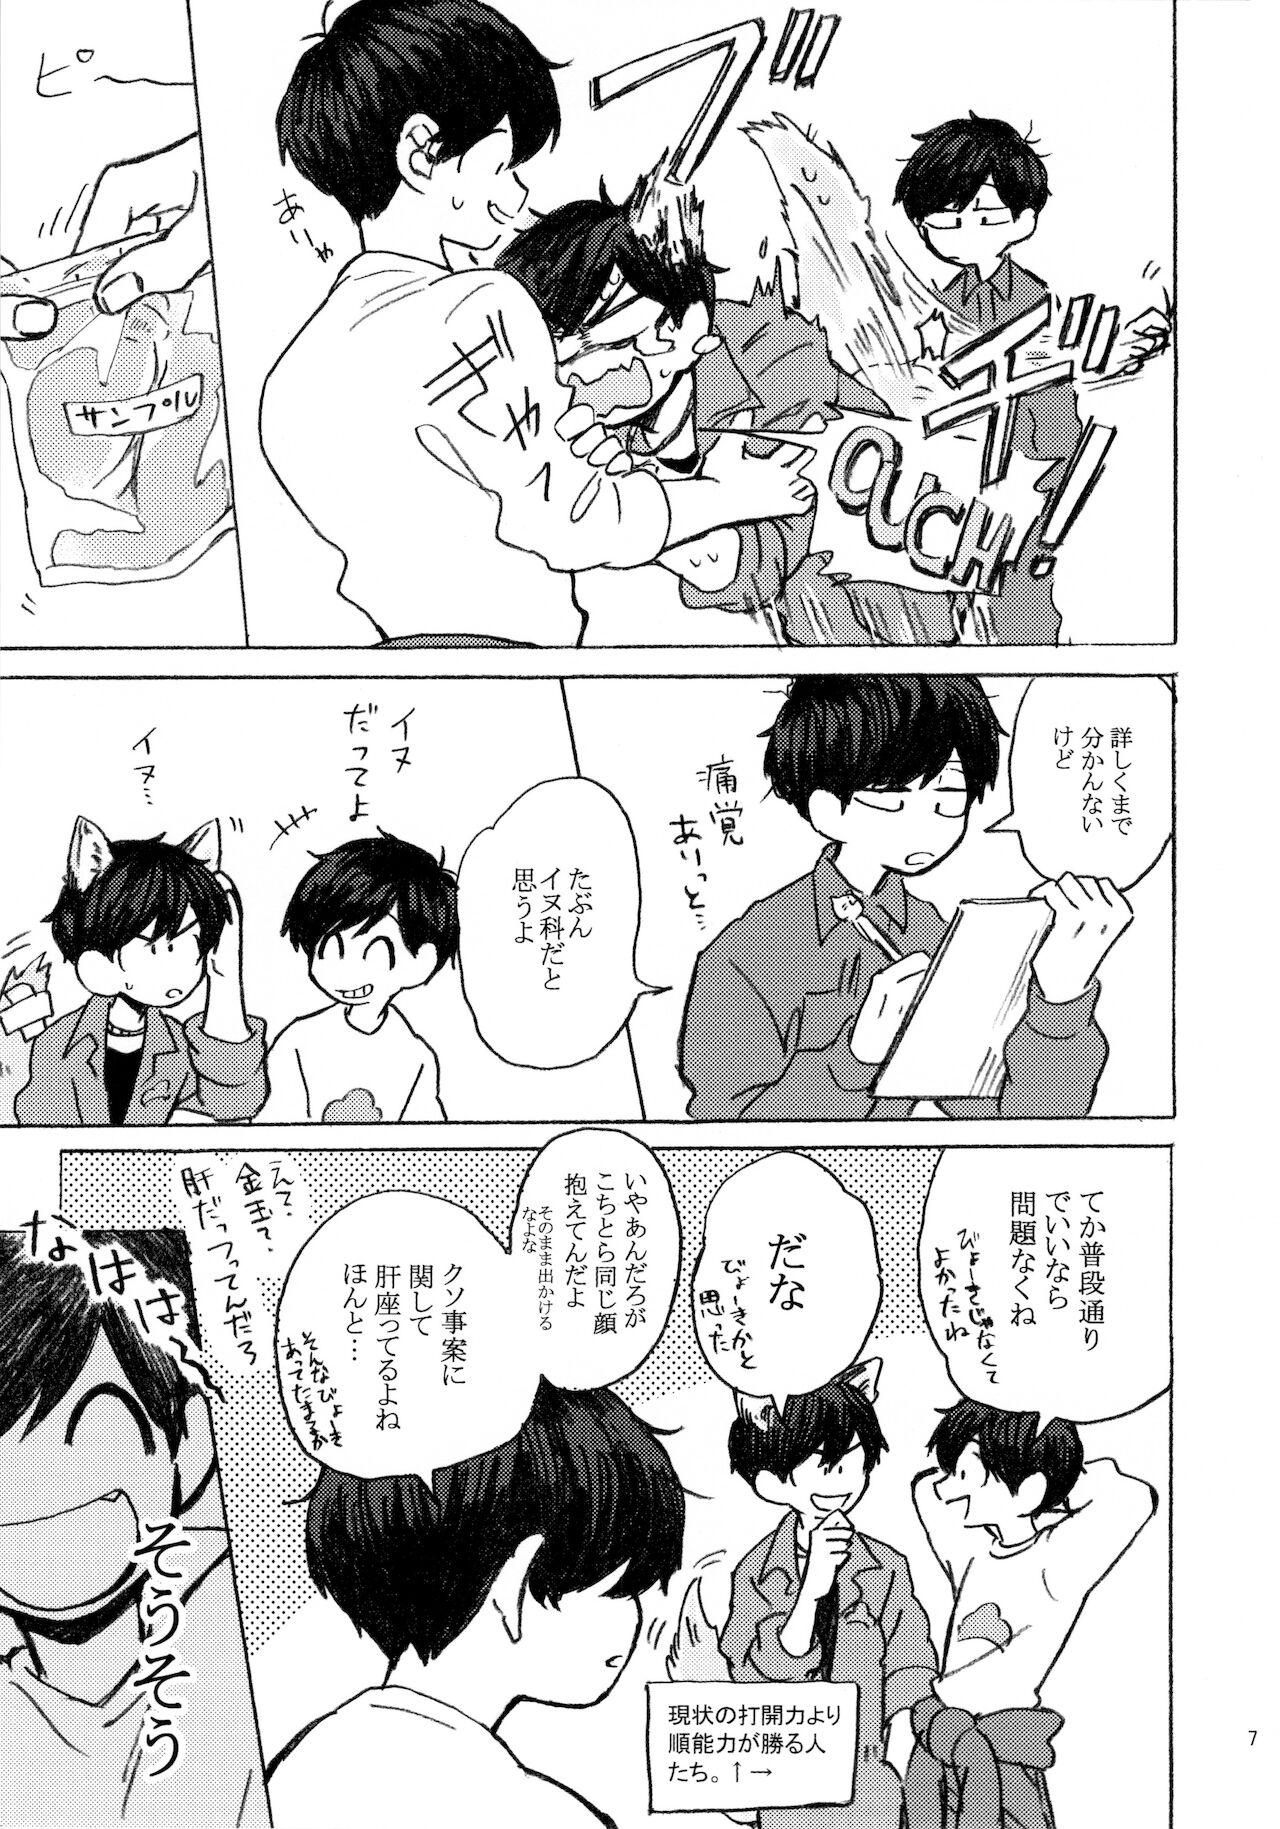 Lady PLEASE WAG YOUR TAIL ONLY TO ME. - Osomatsu-san Stockings - Page 8